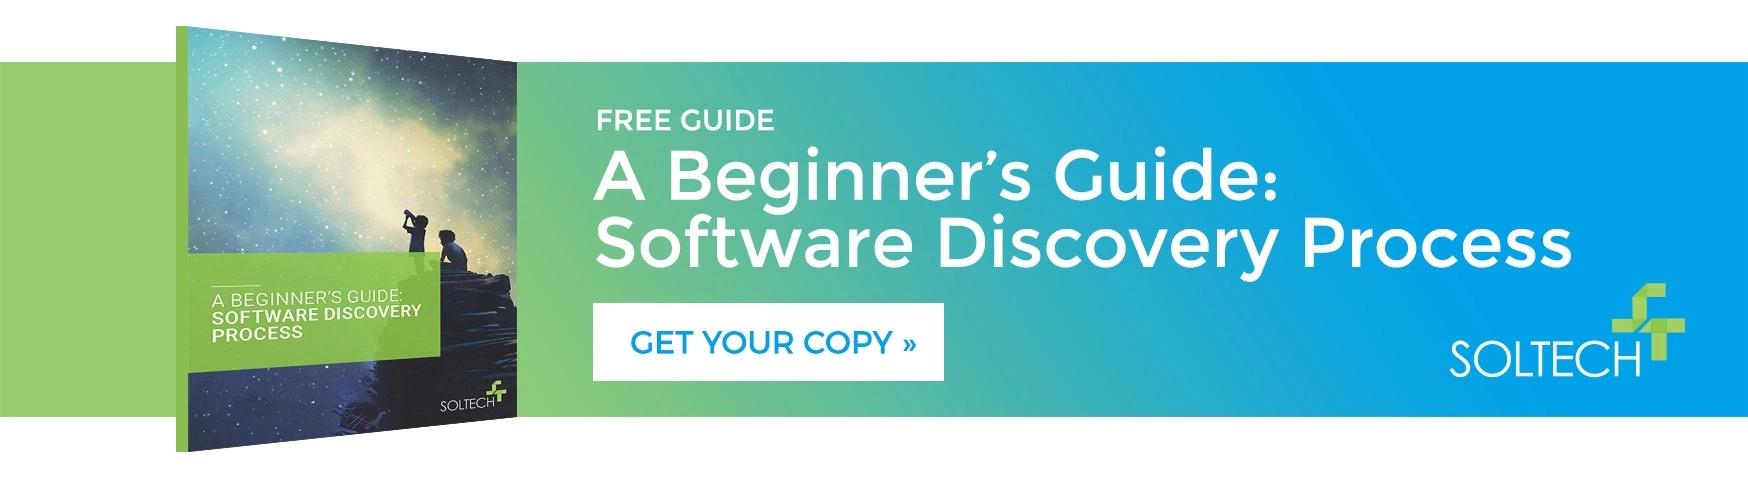 A Beginner's Guide: Software Discovery Process free guide